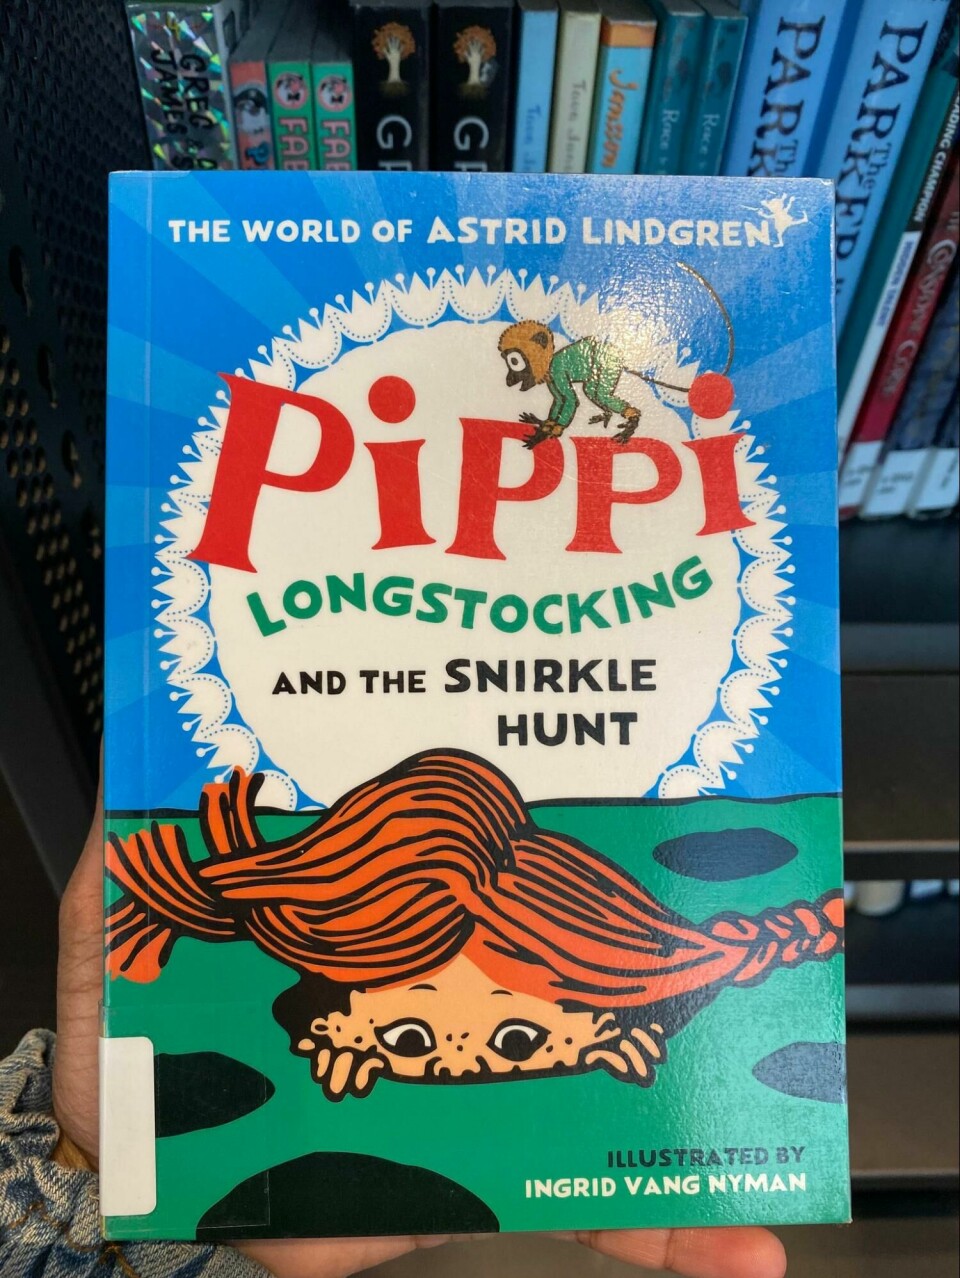 One of the books from the Pippi Longstocking series by Astrid Lindgren.